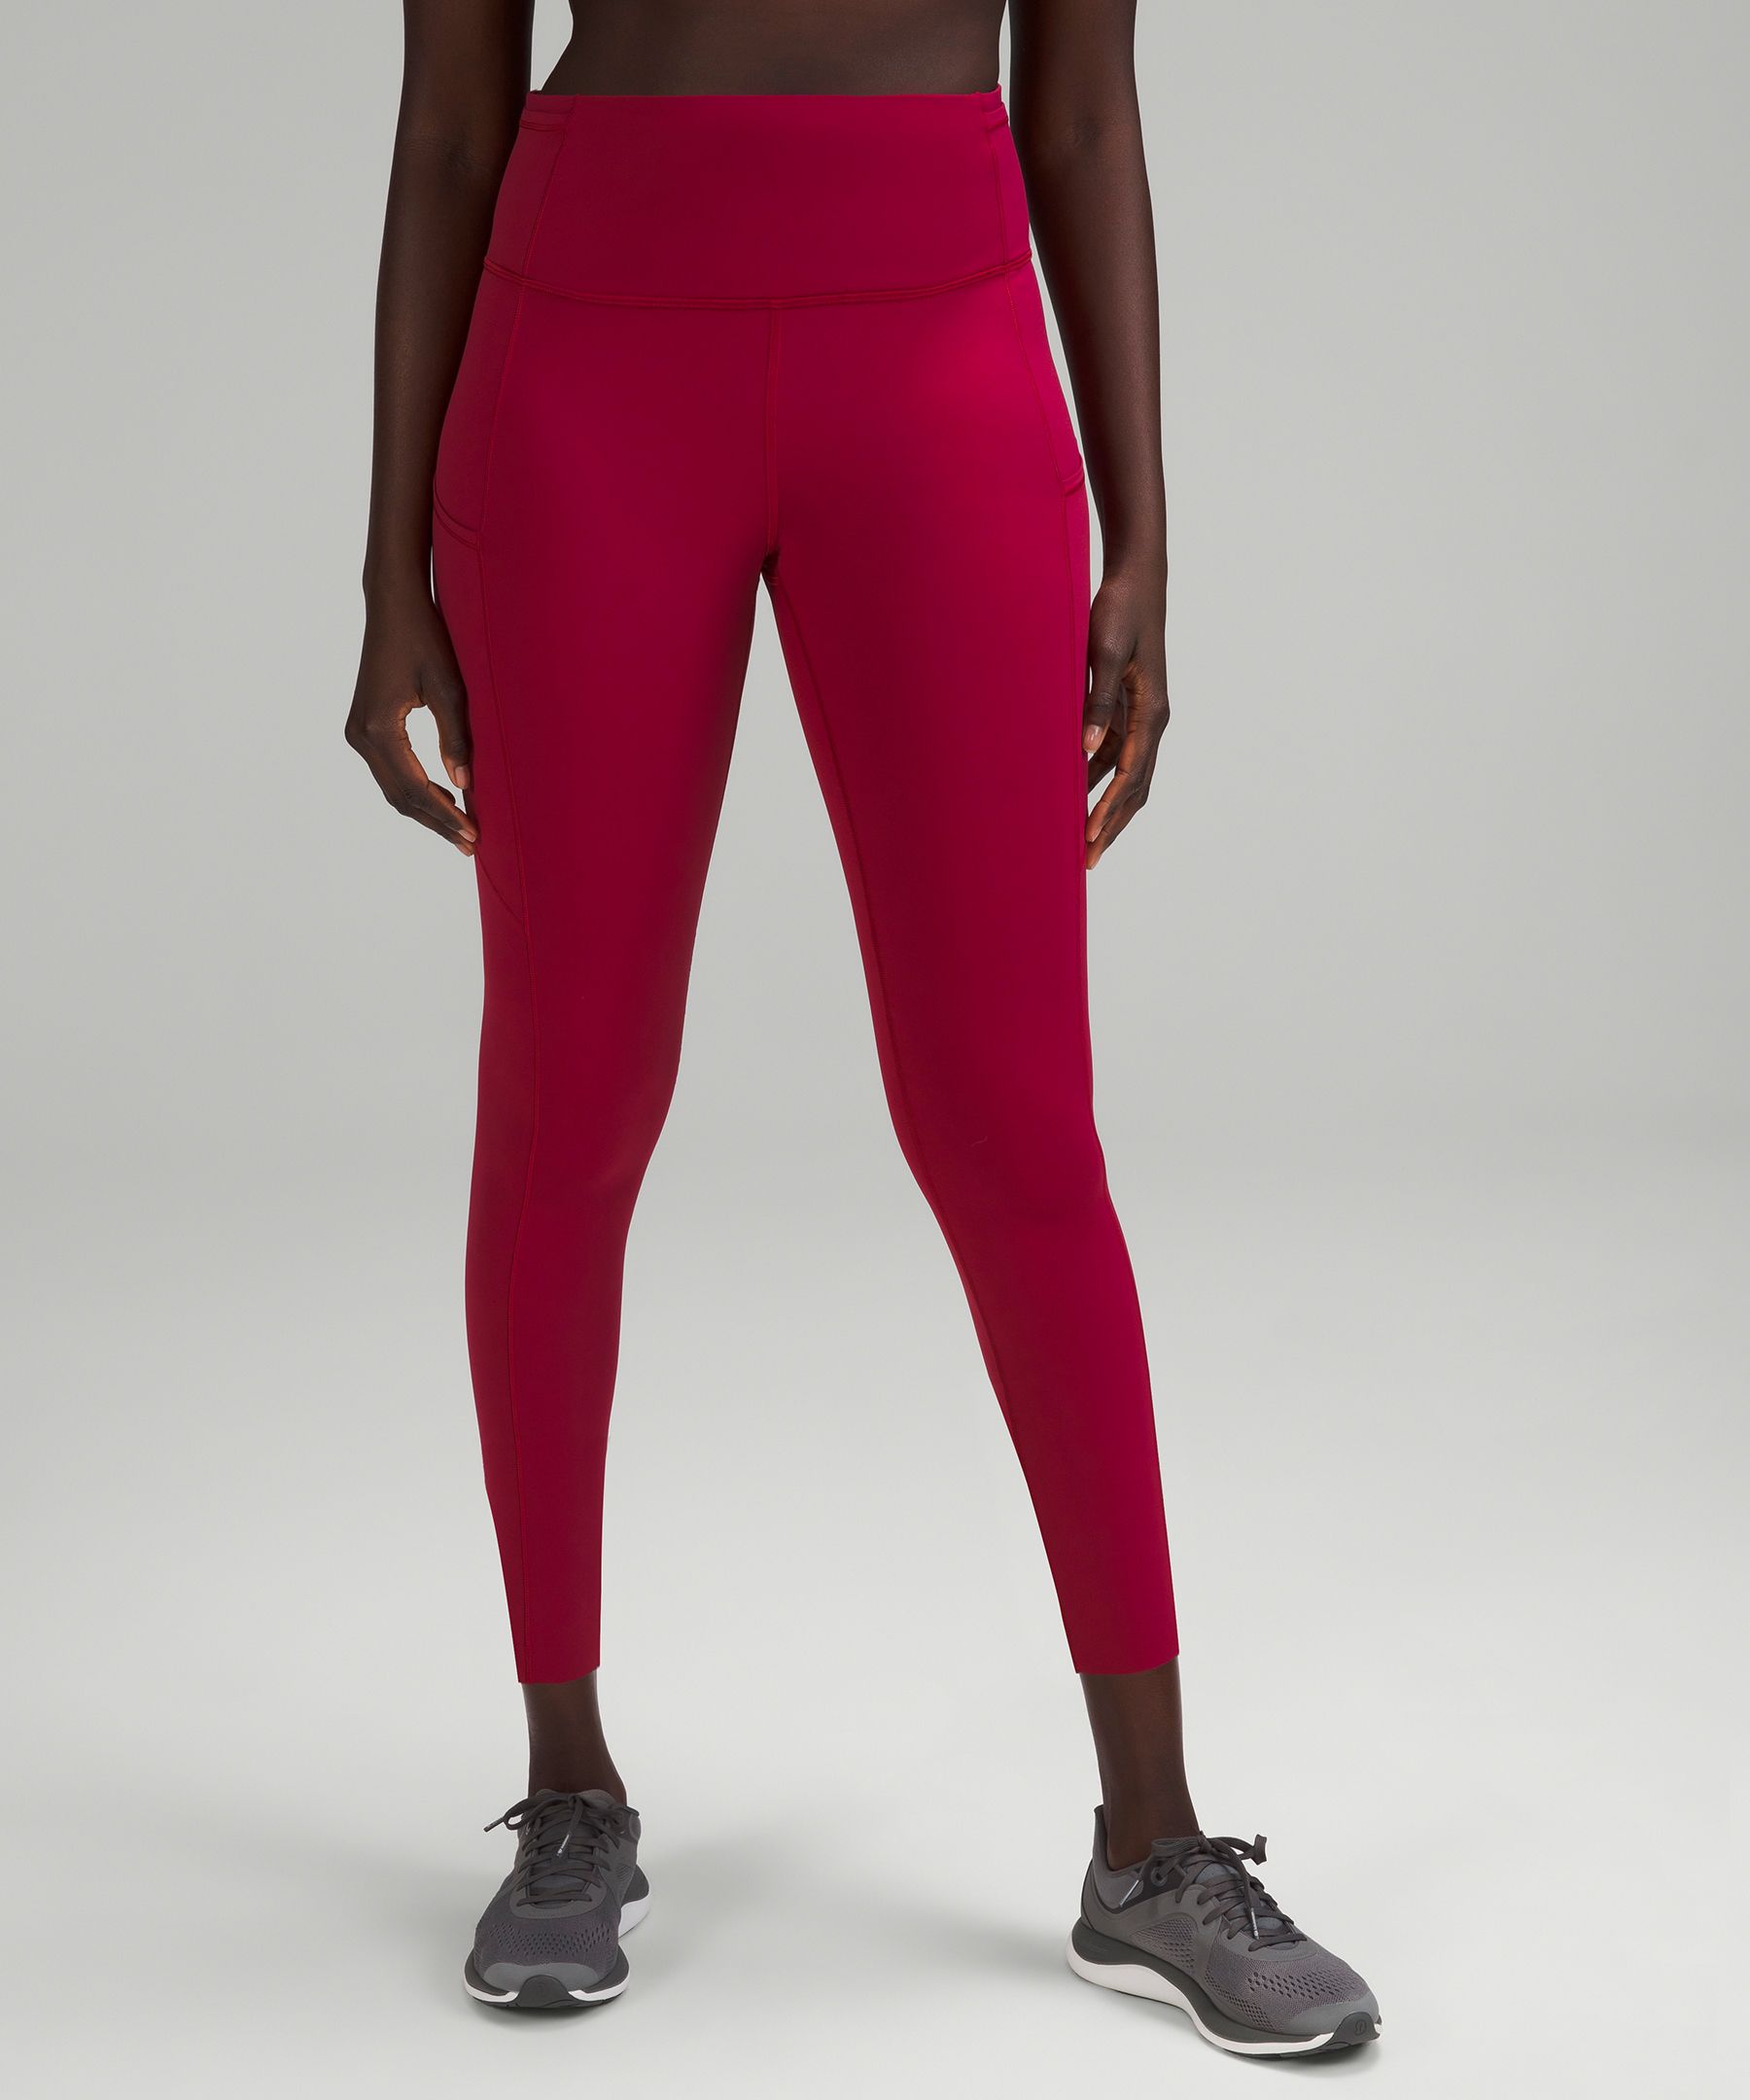 Lululemon • Tight Stuff Tight Cranberry 2 New  Leggings are not pants,  Clothes design, Tights